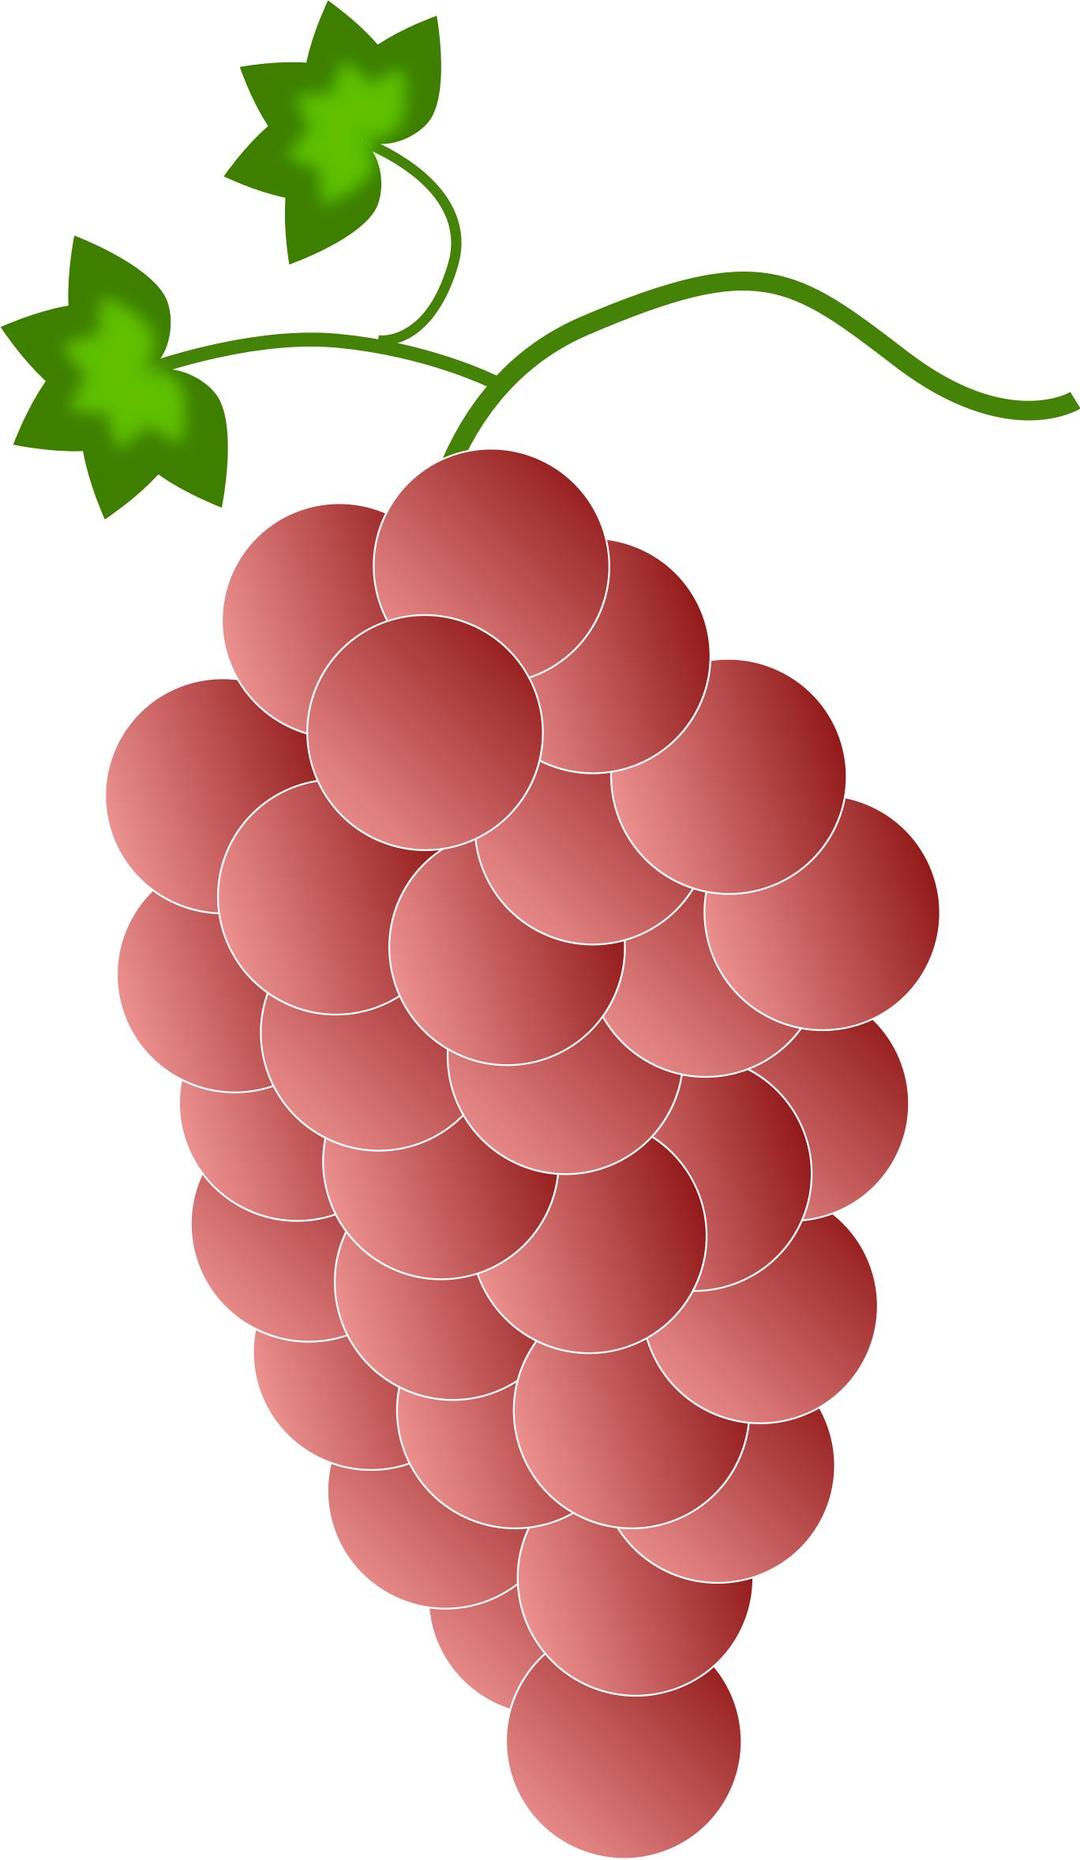 red grapes png transparent